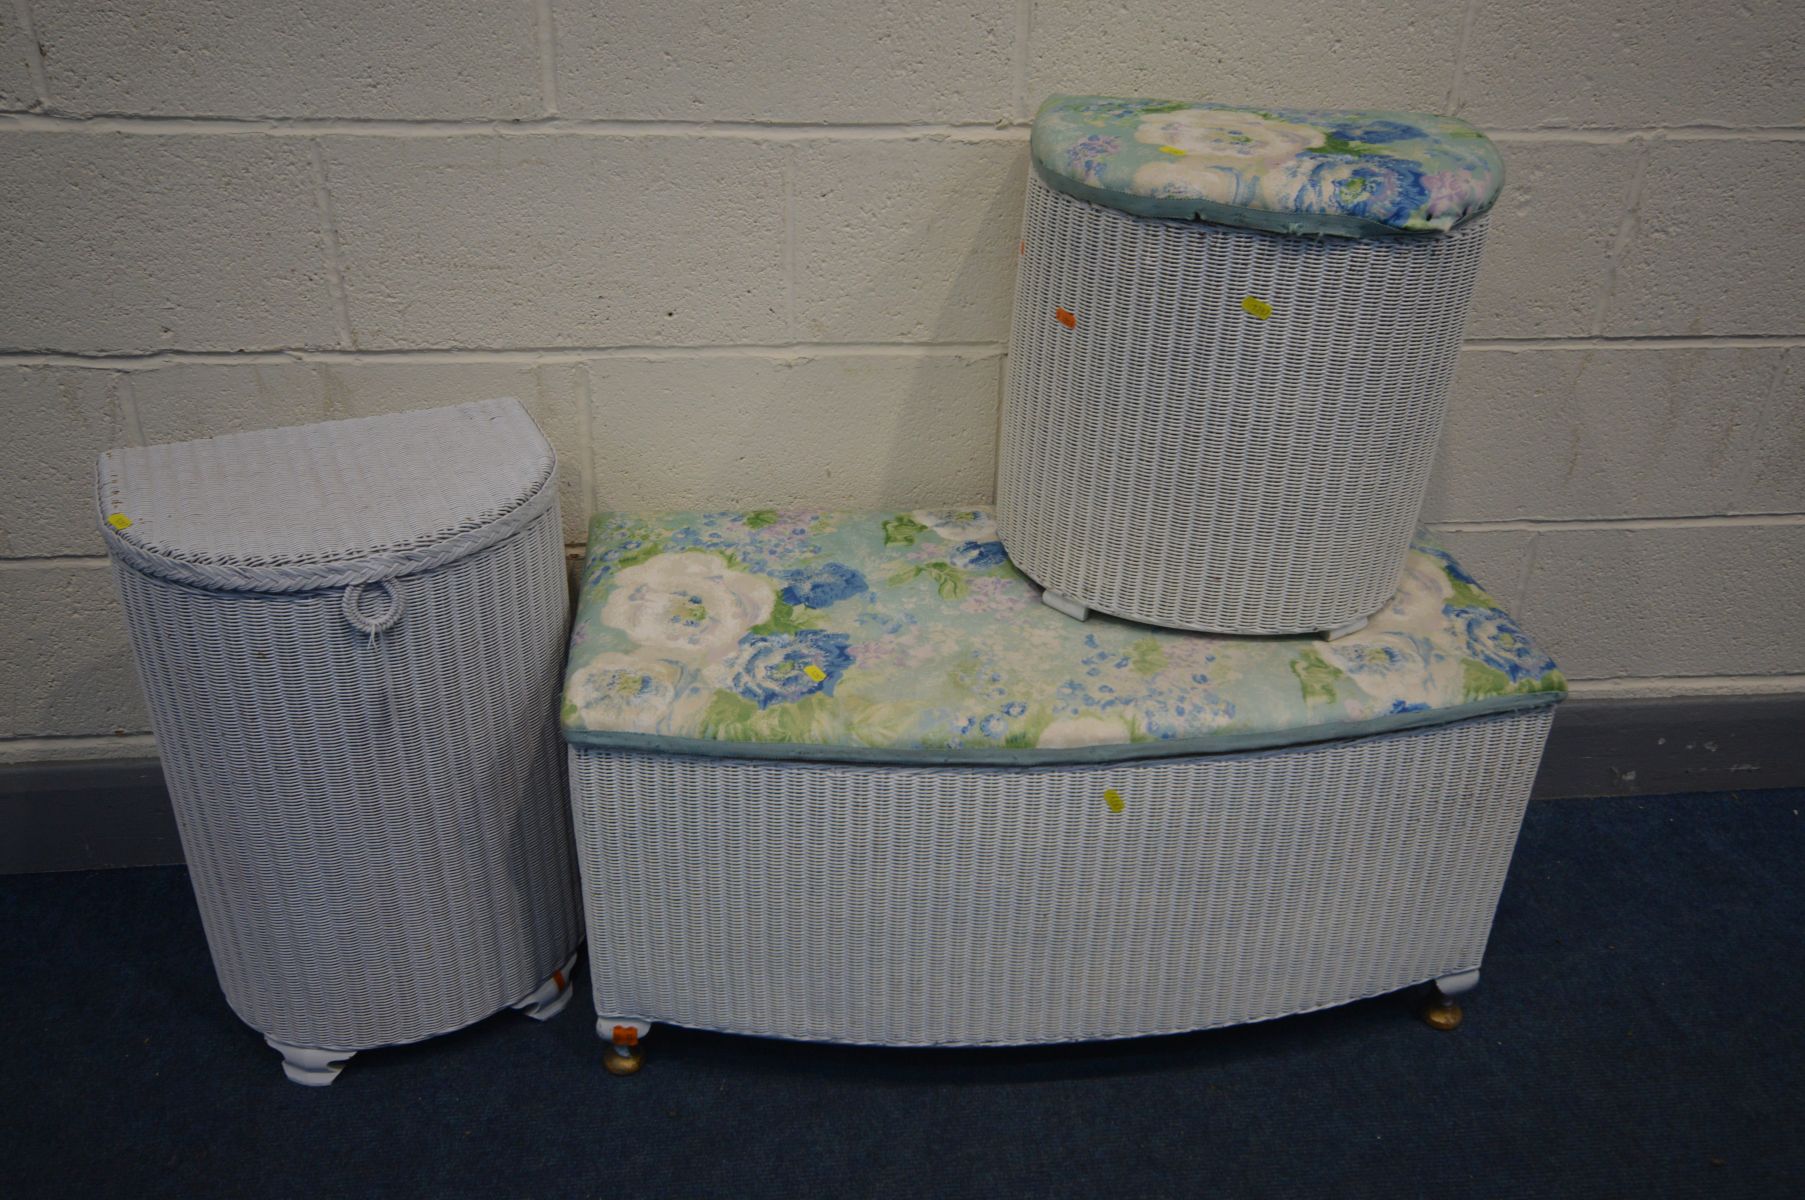 A LLOYD LOOM OTTOMAN AND TWO LINEN BASKETS (3)